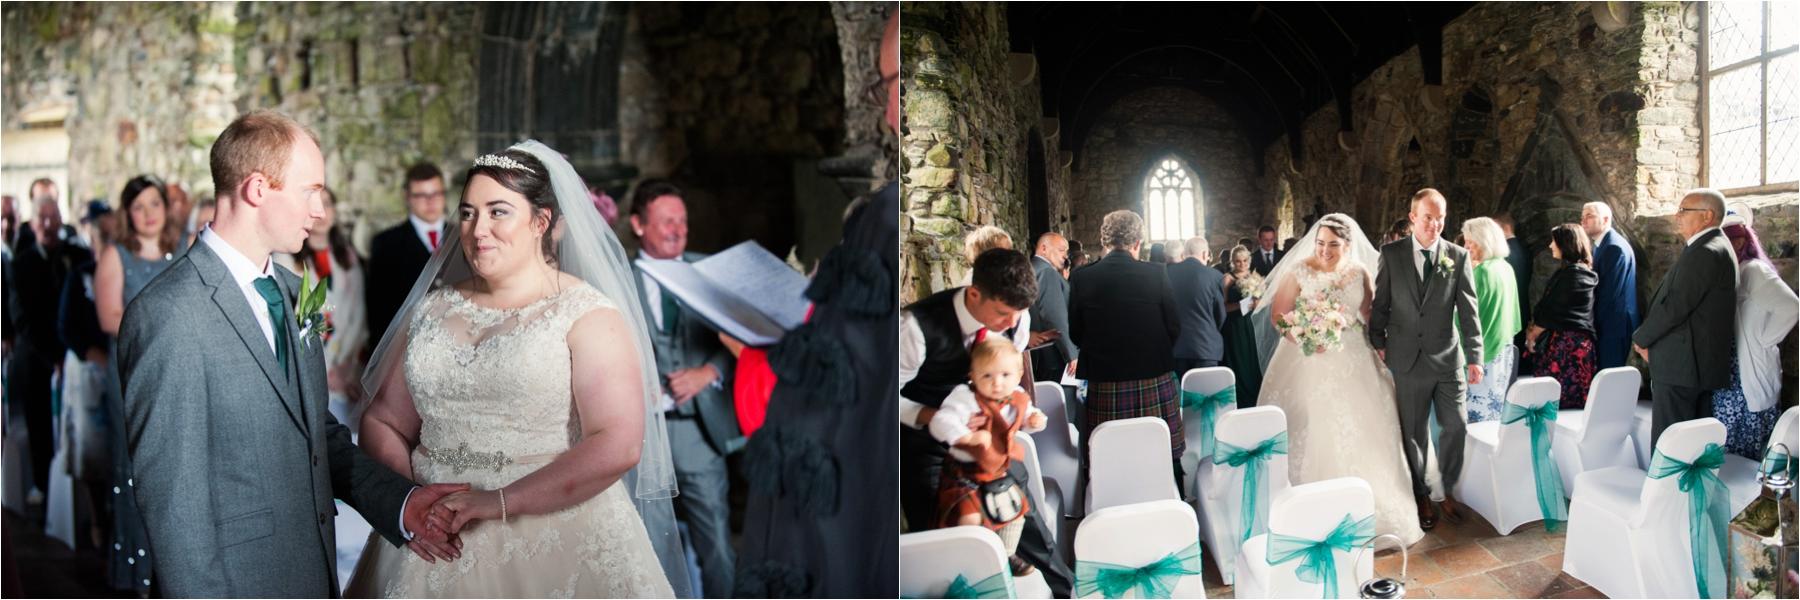 Newlyweds Lauren and Michael leave St Clements Church in Rodel on the Isle of Harris. 